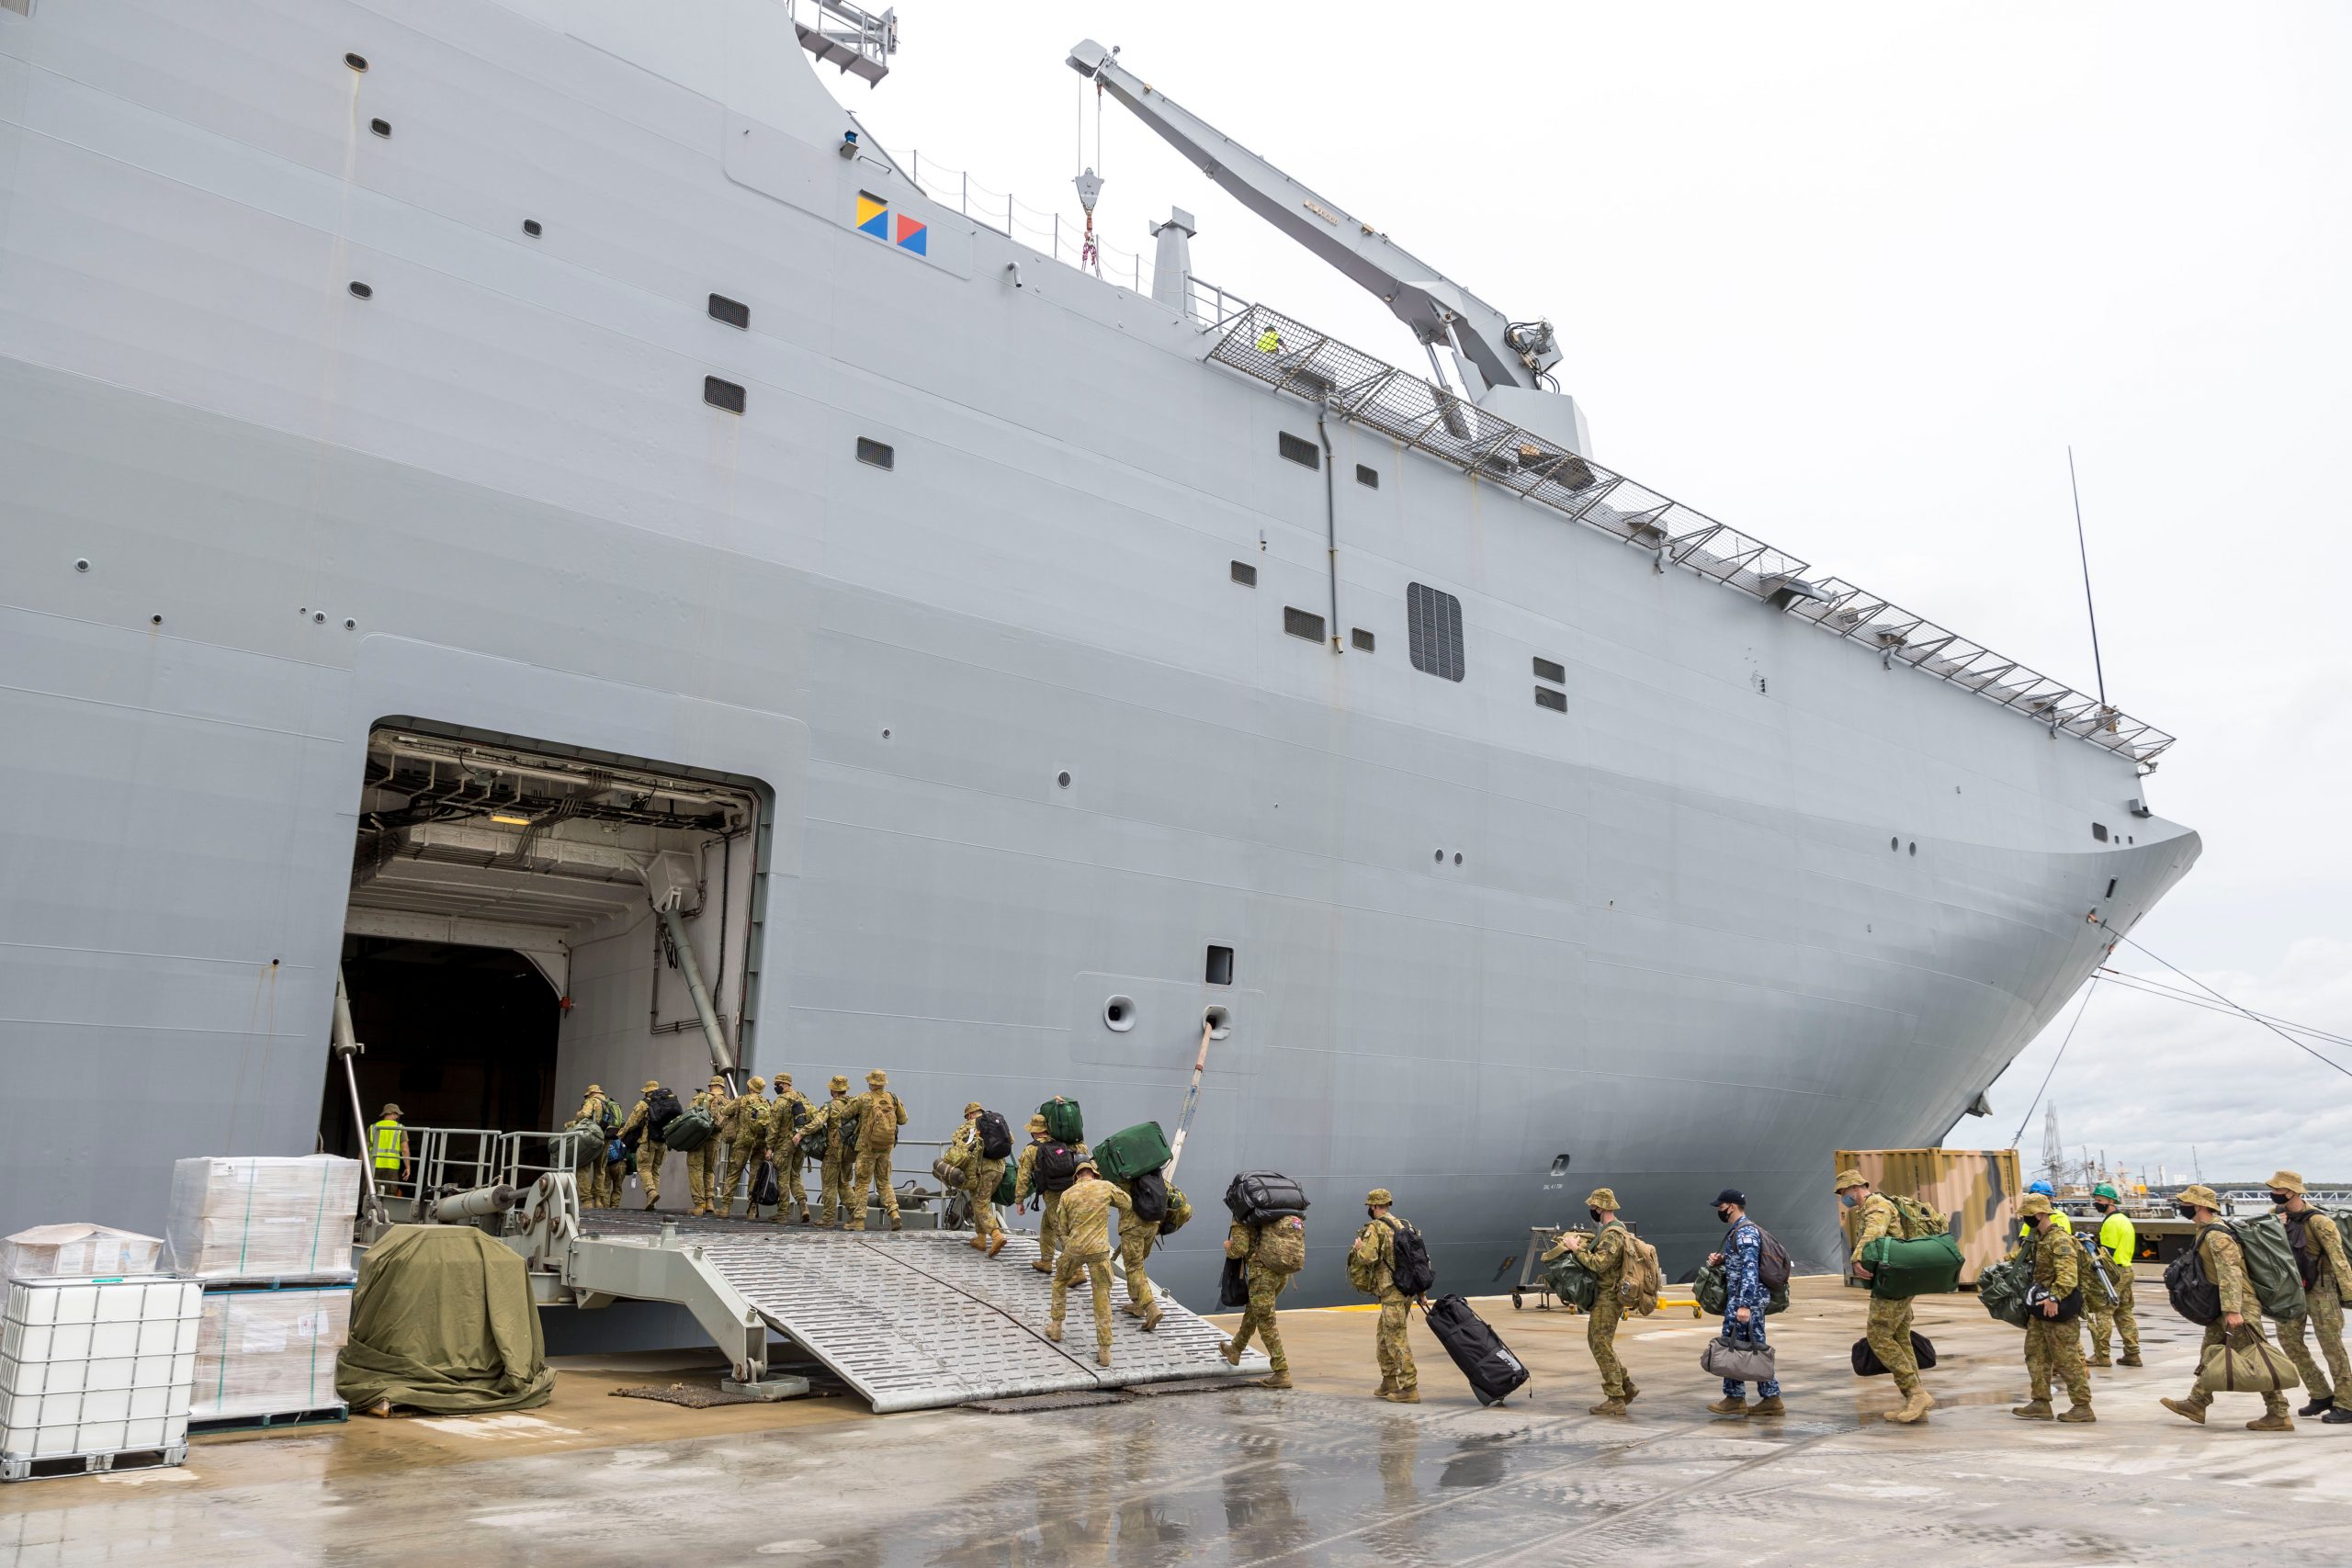 Australian navy risks infecting Tonga, as COVID-19 positive crew provides aid